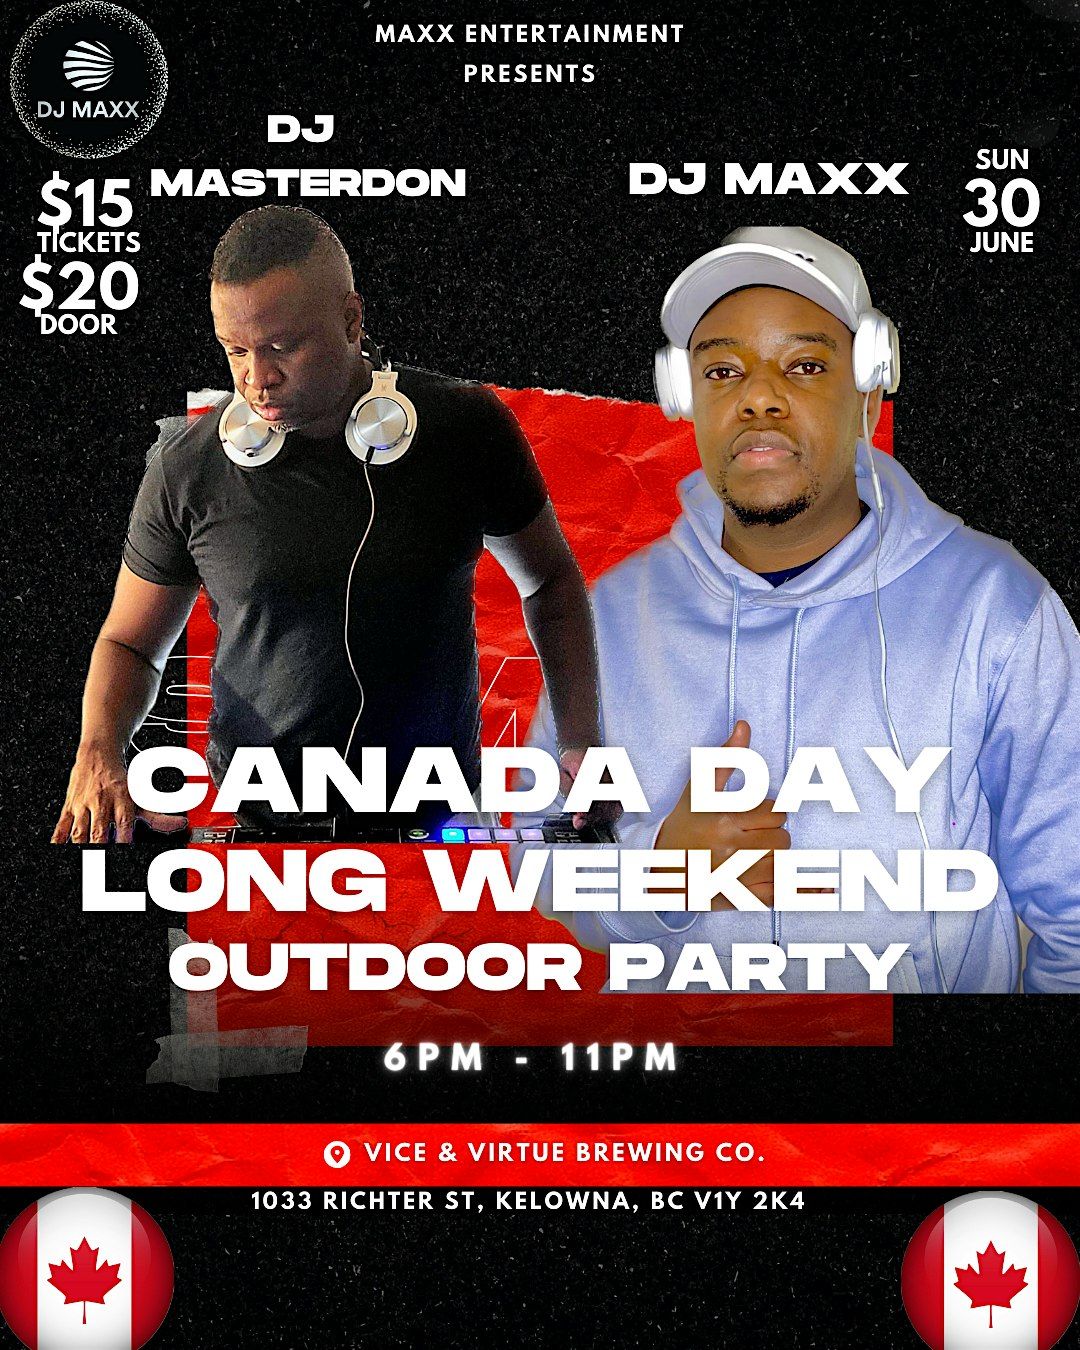 Canada Day Long Weekend Outdoor Party